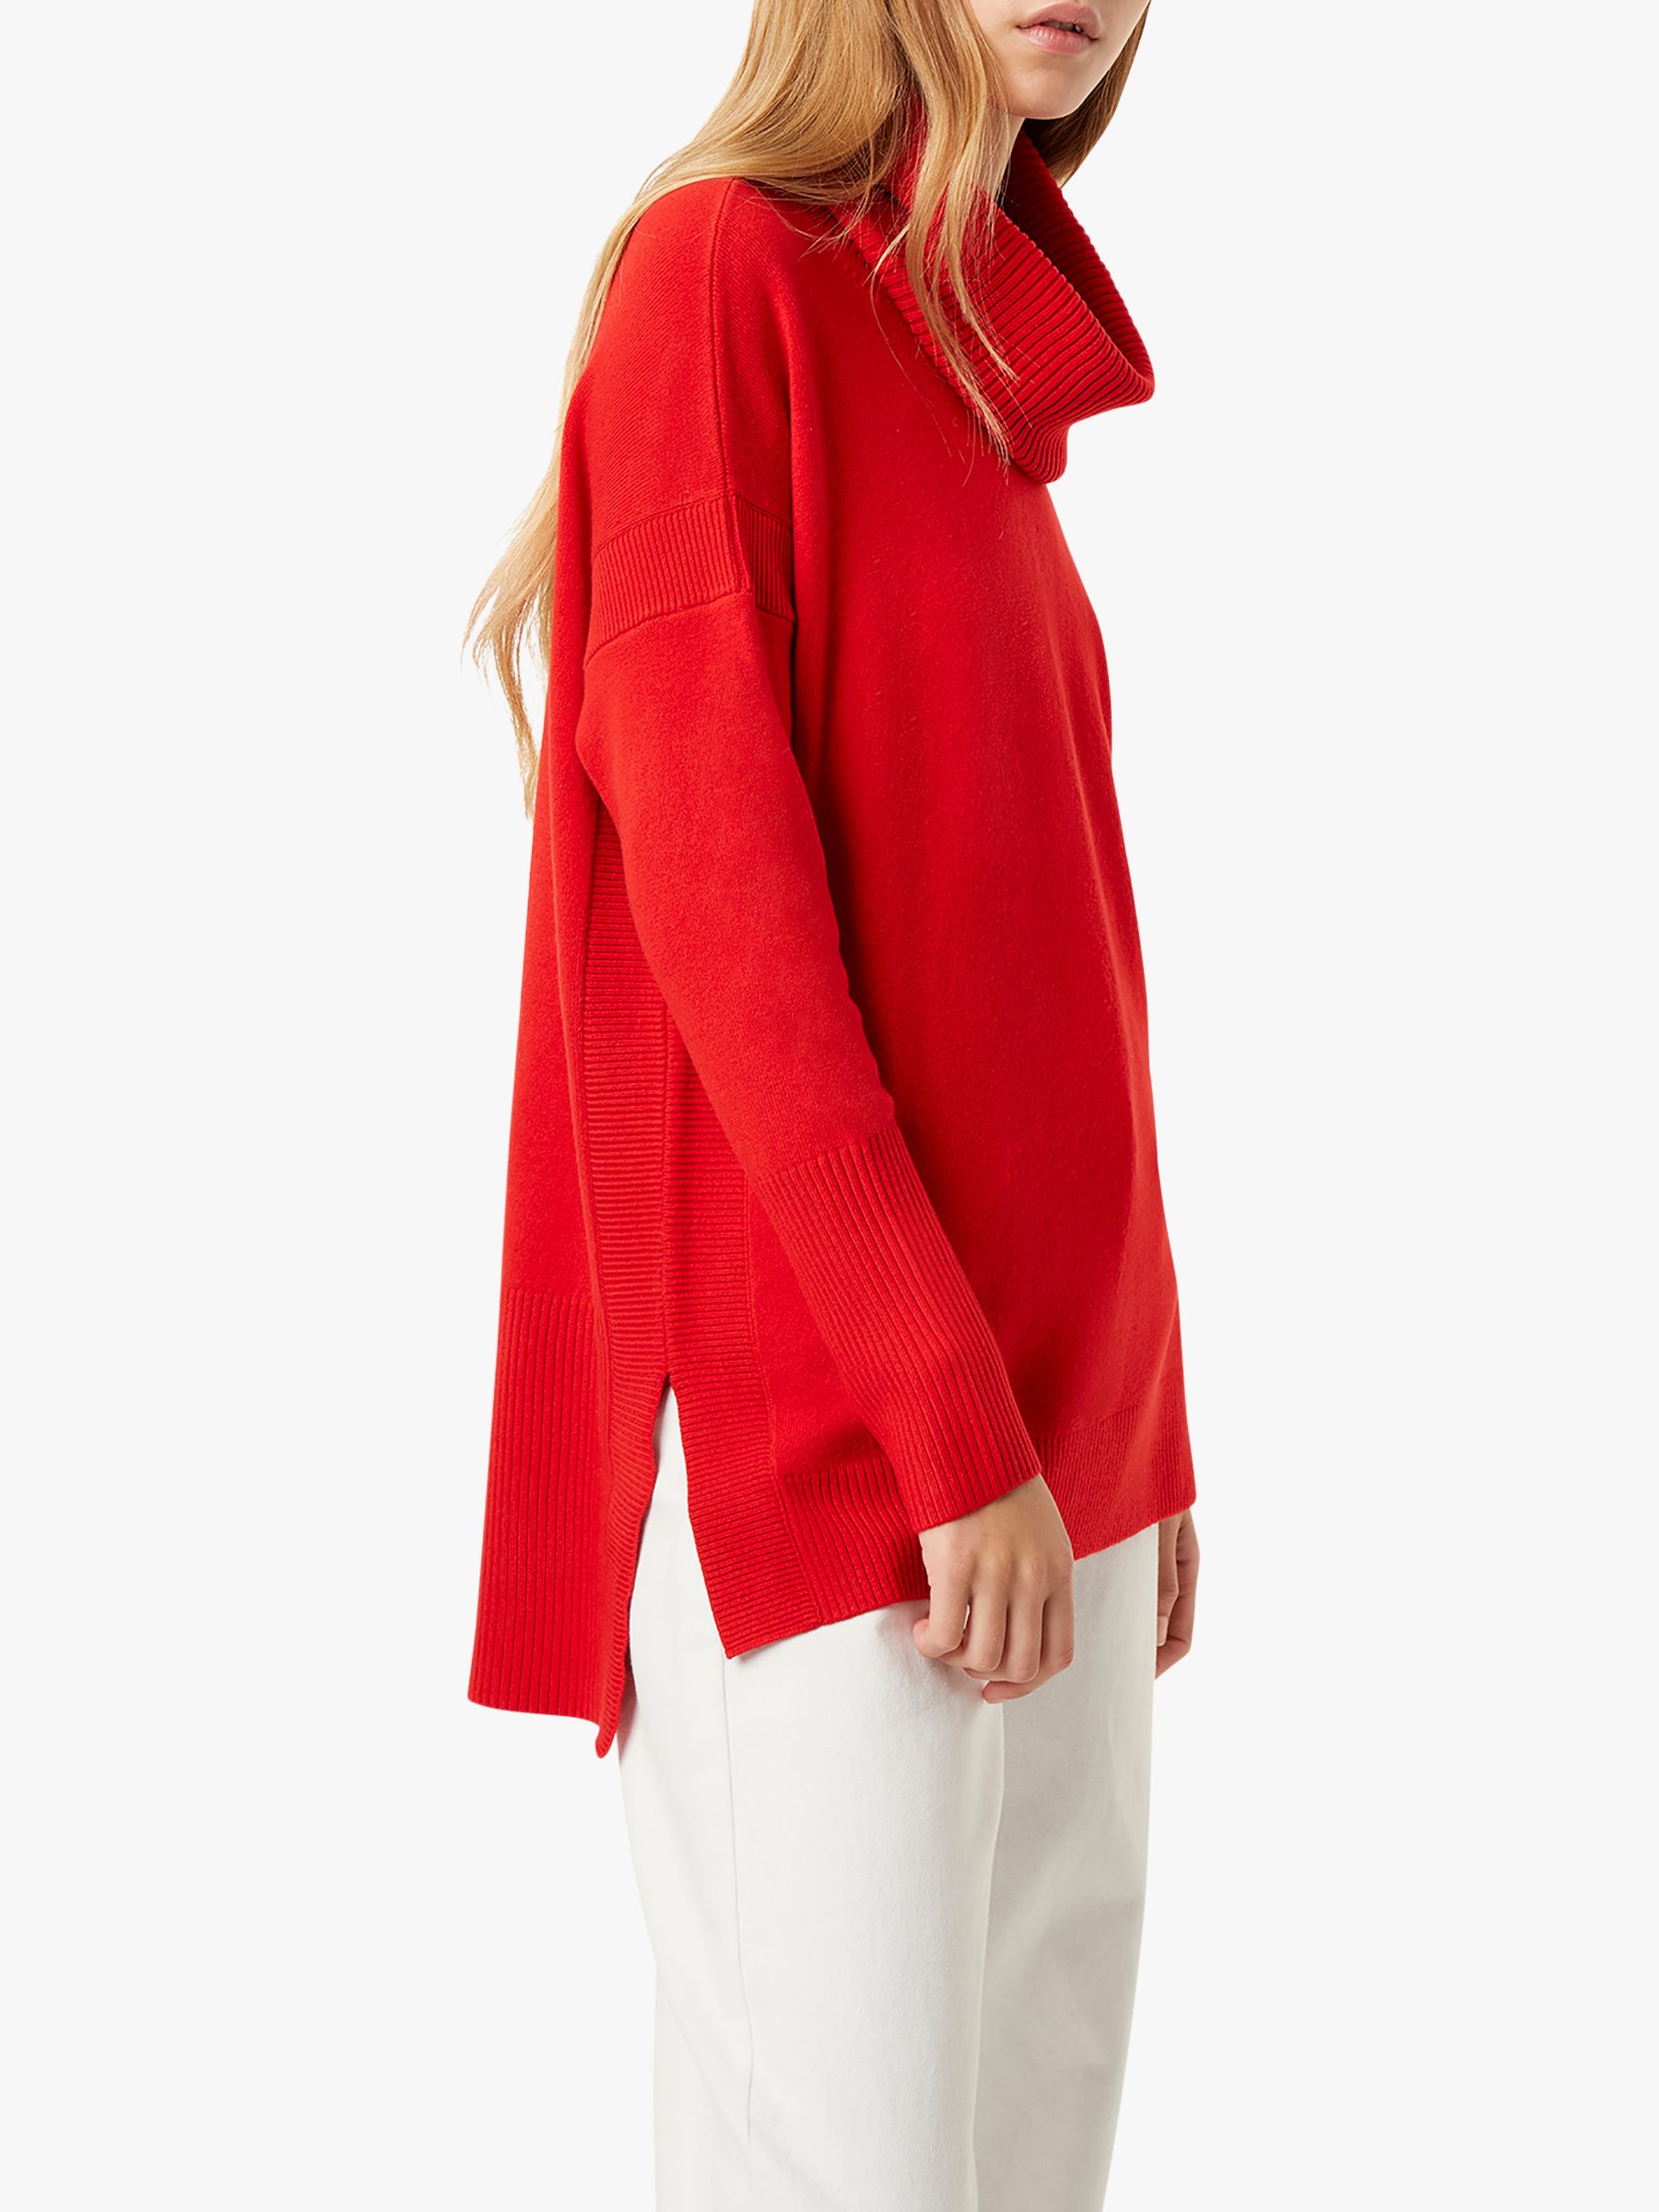 French Connection Cowl Neck Jumper at John Lewis & Partners